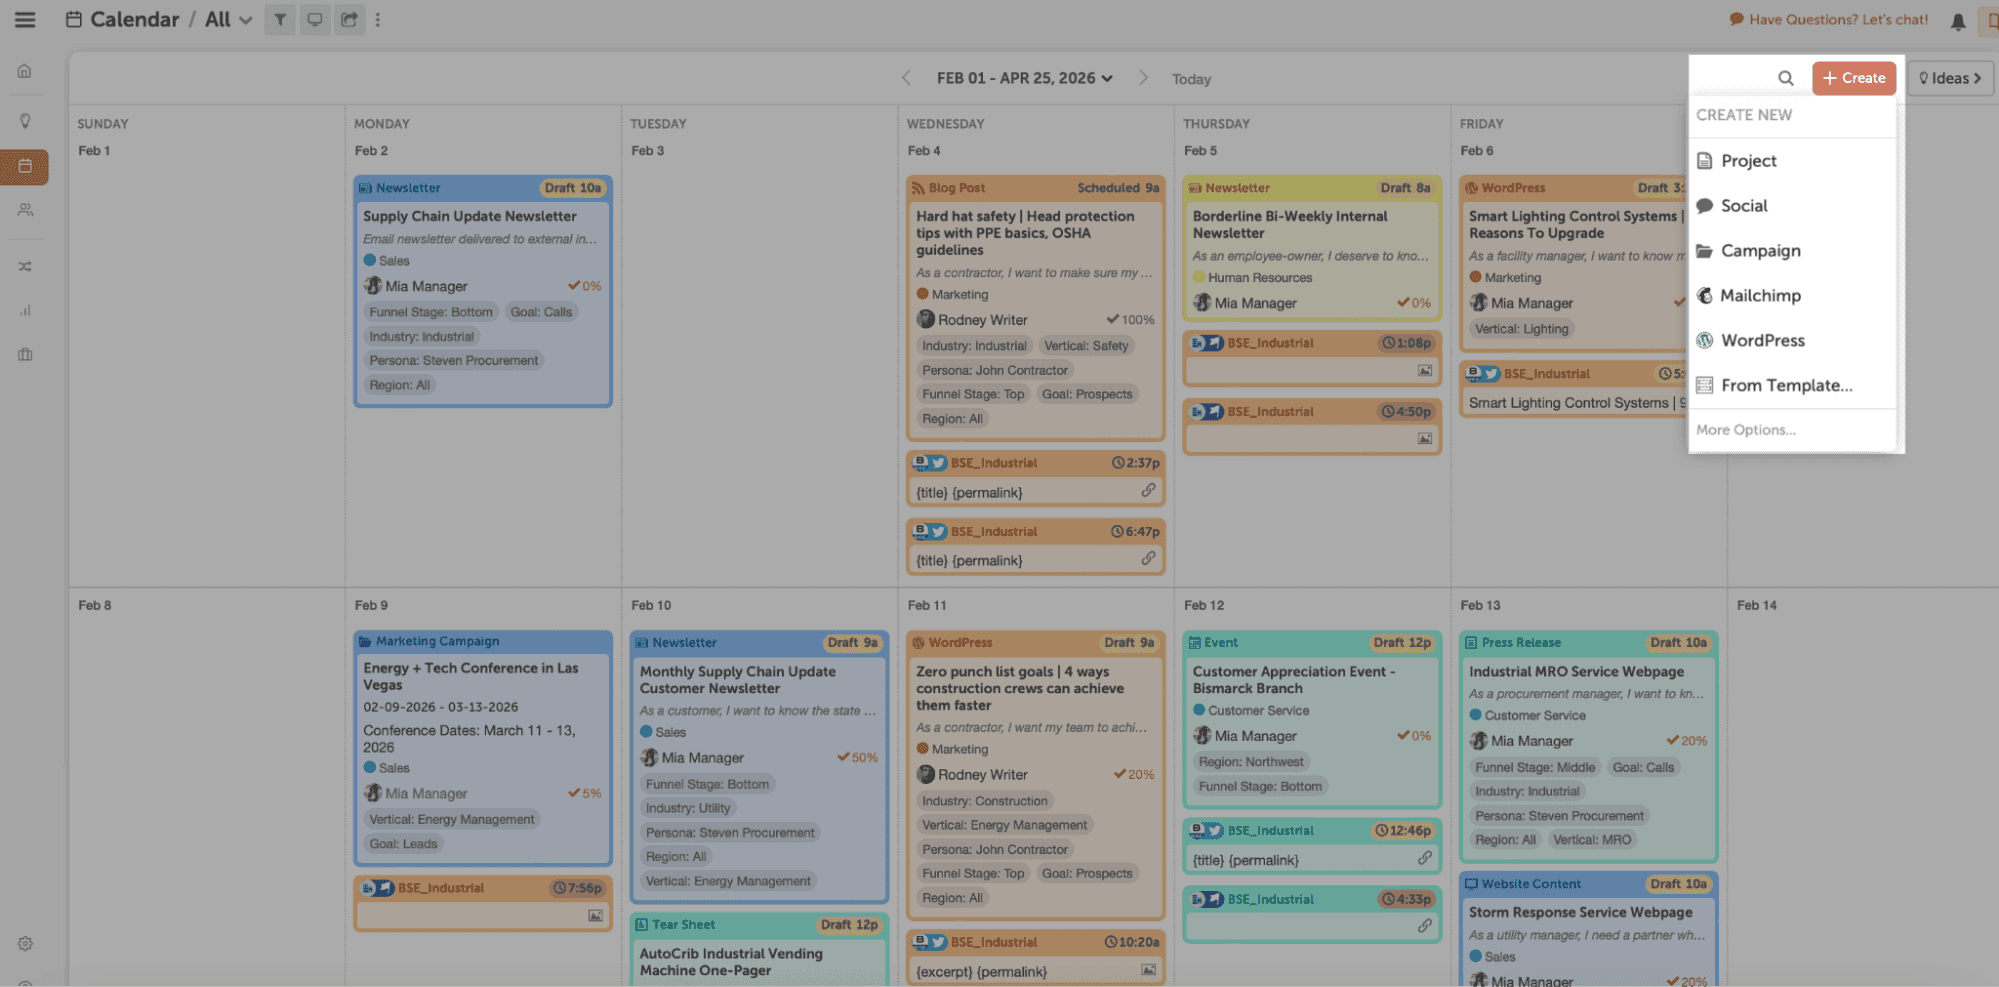 How to create new projects in the calendar.